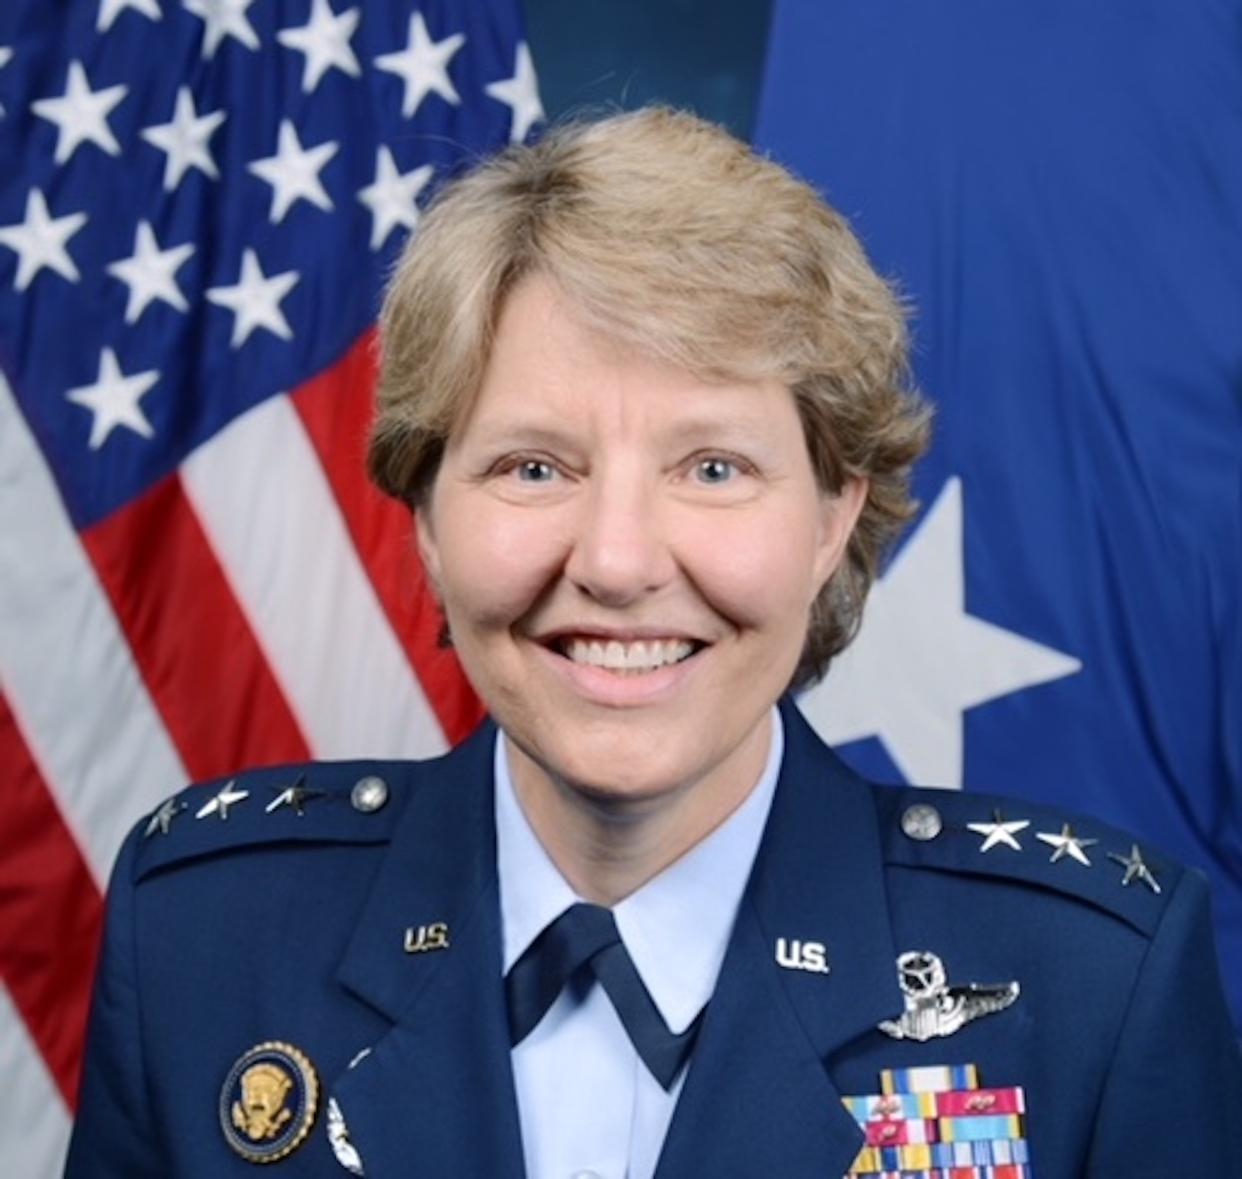 Michelle D. Johnson was superintendent of the United States Air Force Academy in 2016. (Special to Yahoo Sports)